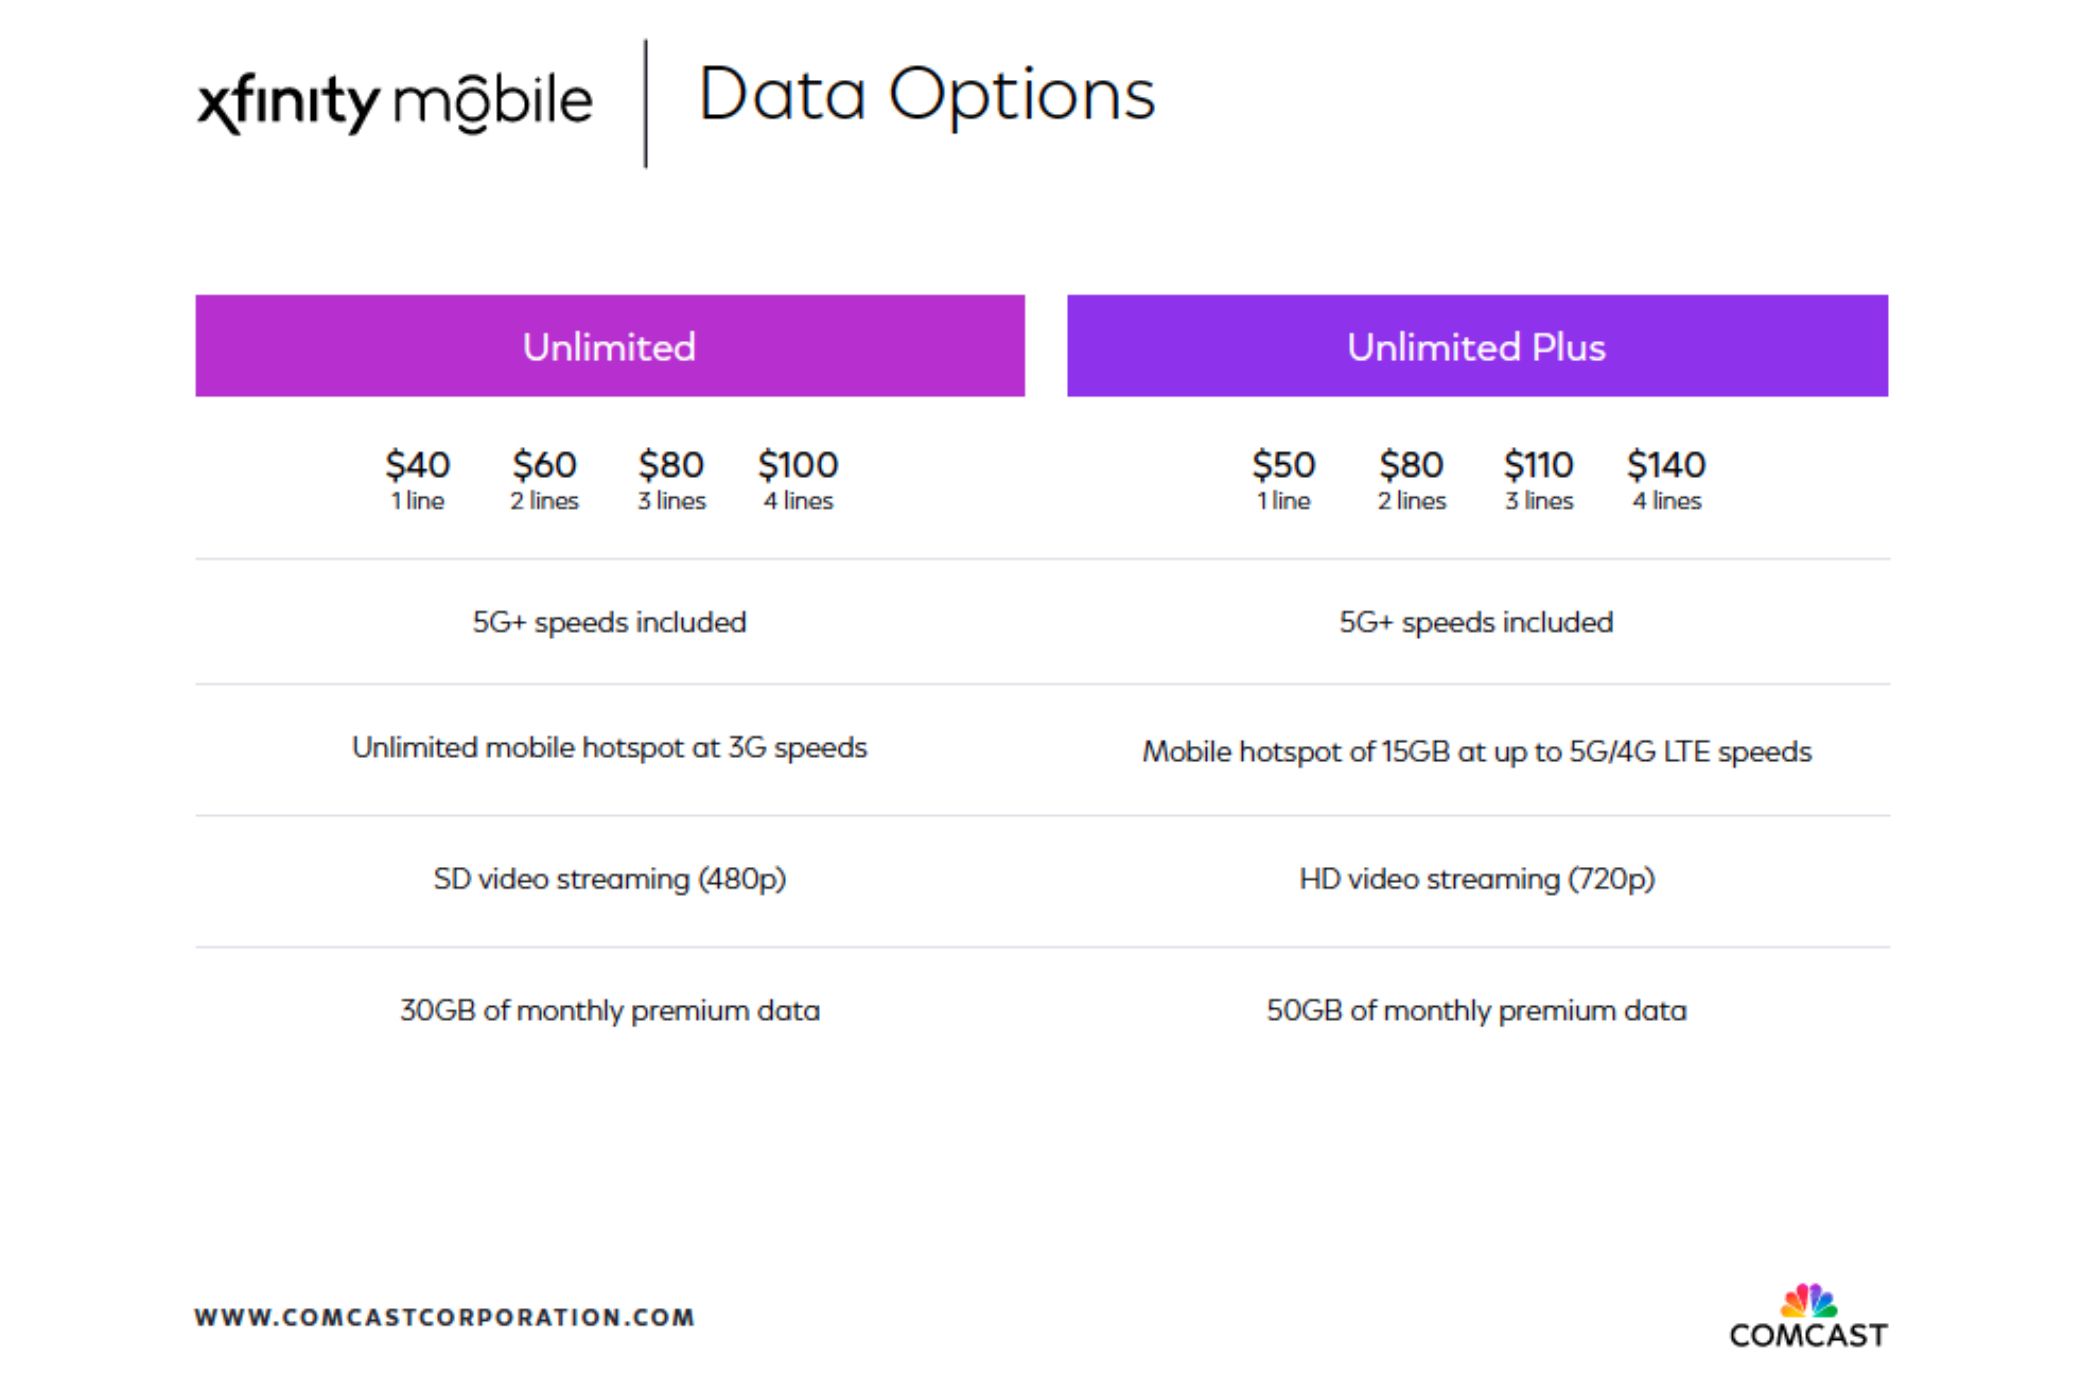 A table explaining the pricing and features for Xfinity Mobile's Unlimited and Unlimited Plus plans.